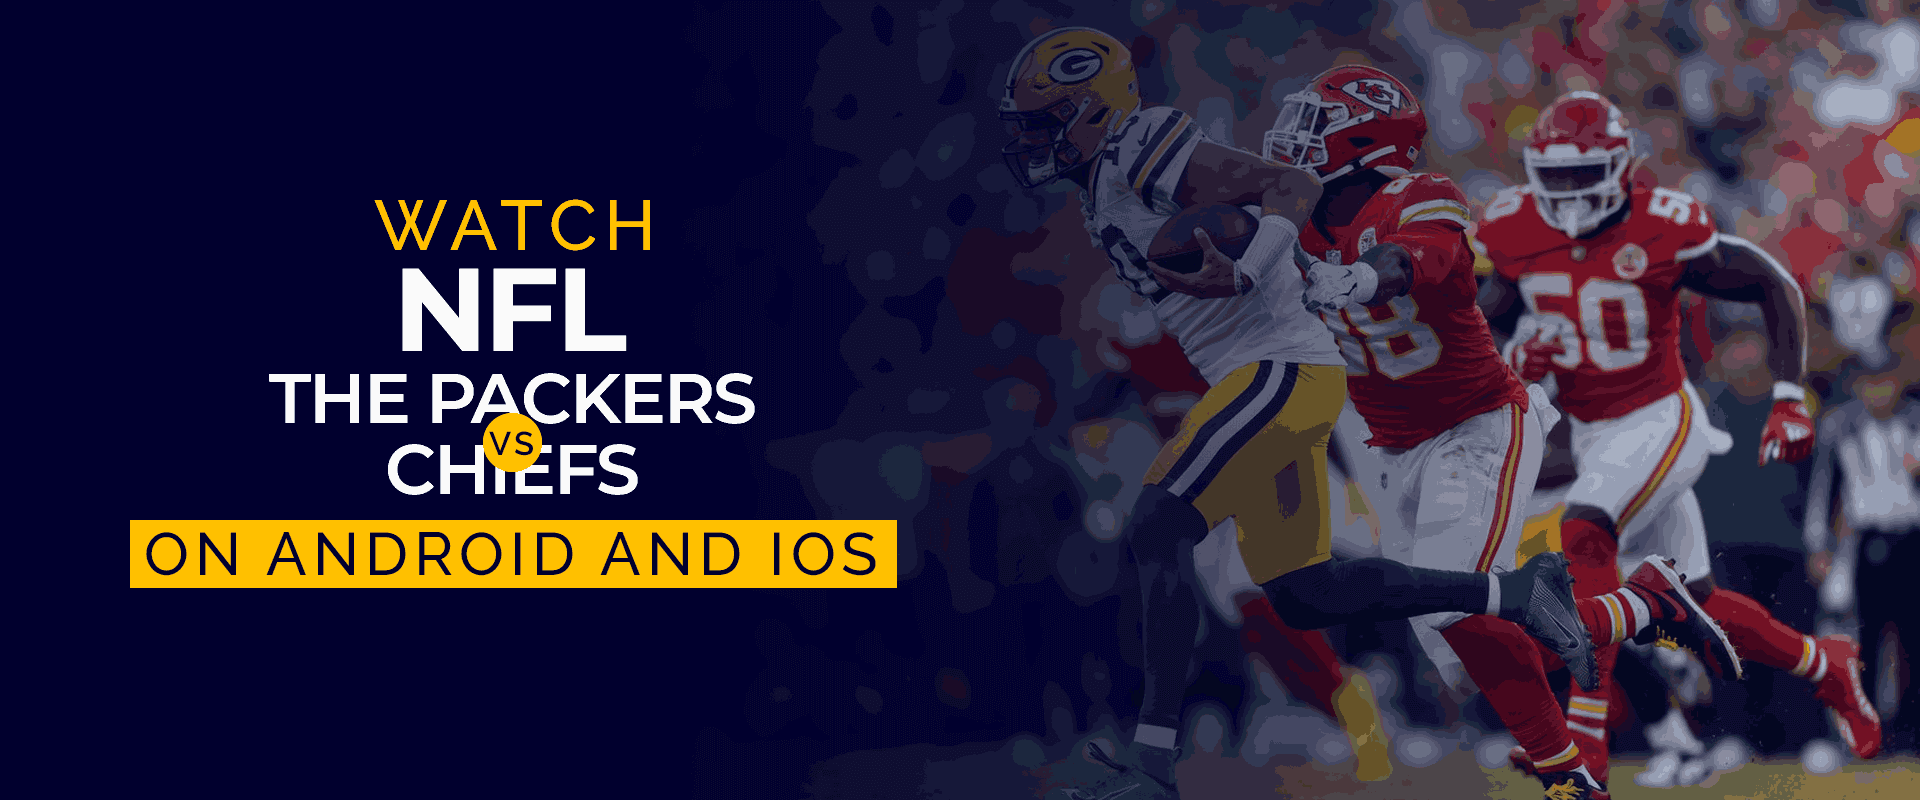 Watch NFL The Packers Vs Chiefs on Android and iOS